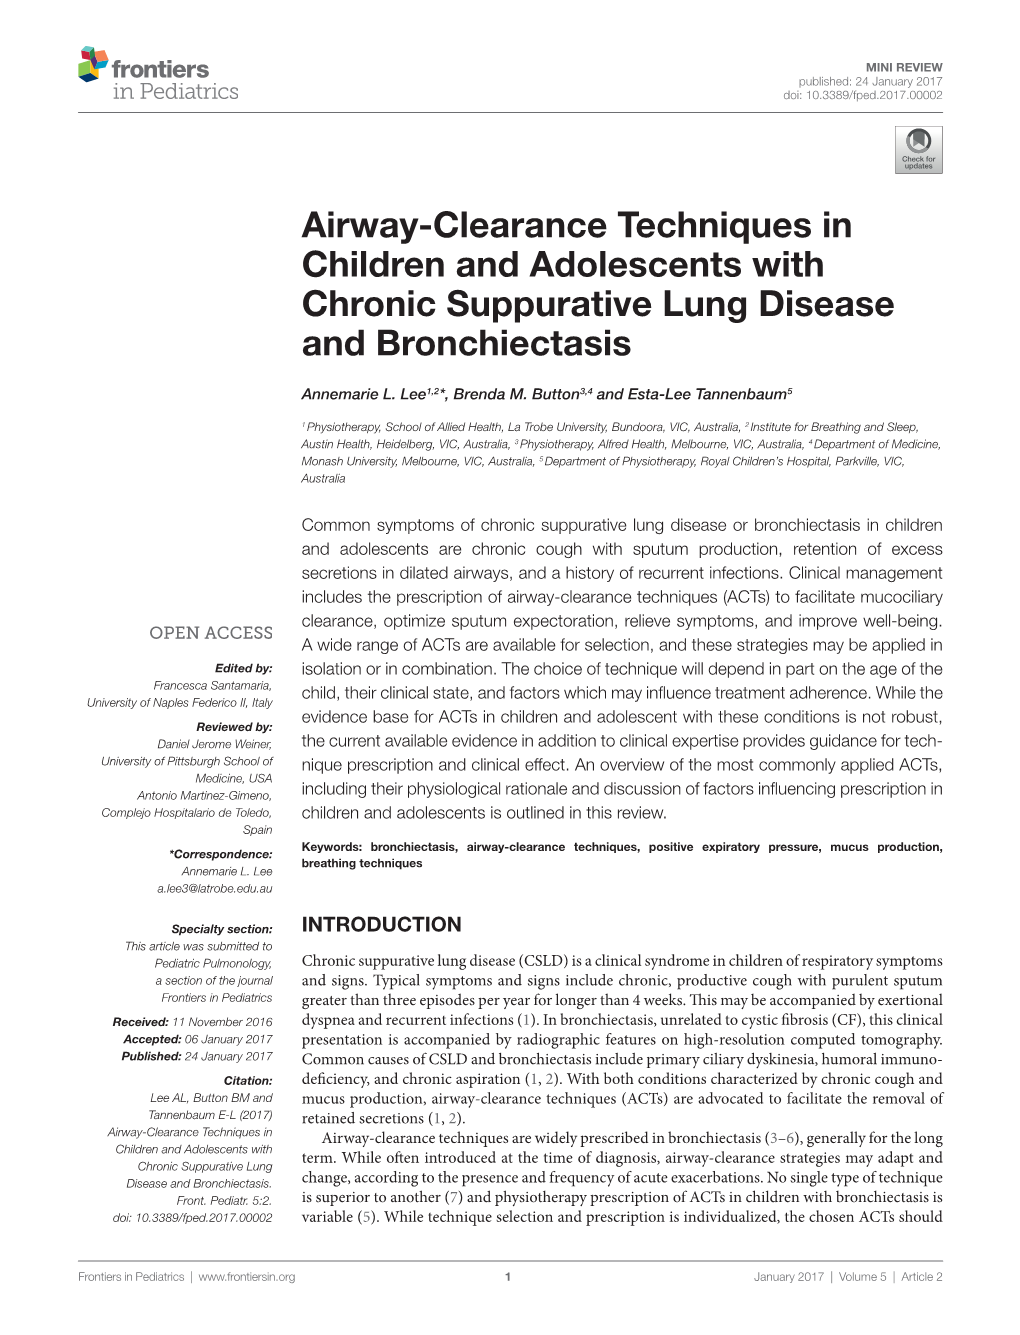 Airway-Clearance Techniques in Children and Adolescents with Chronic Suppurative Lung Disease and Bronchiectasis